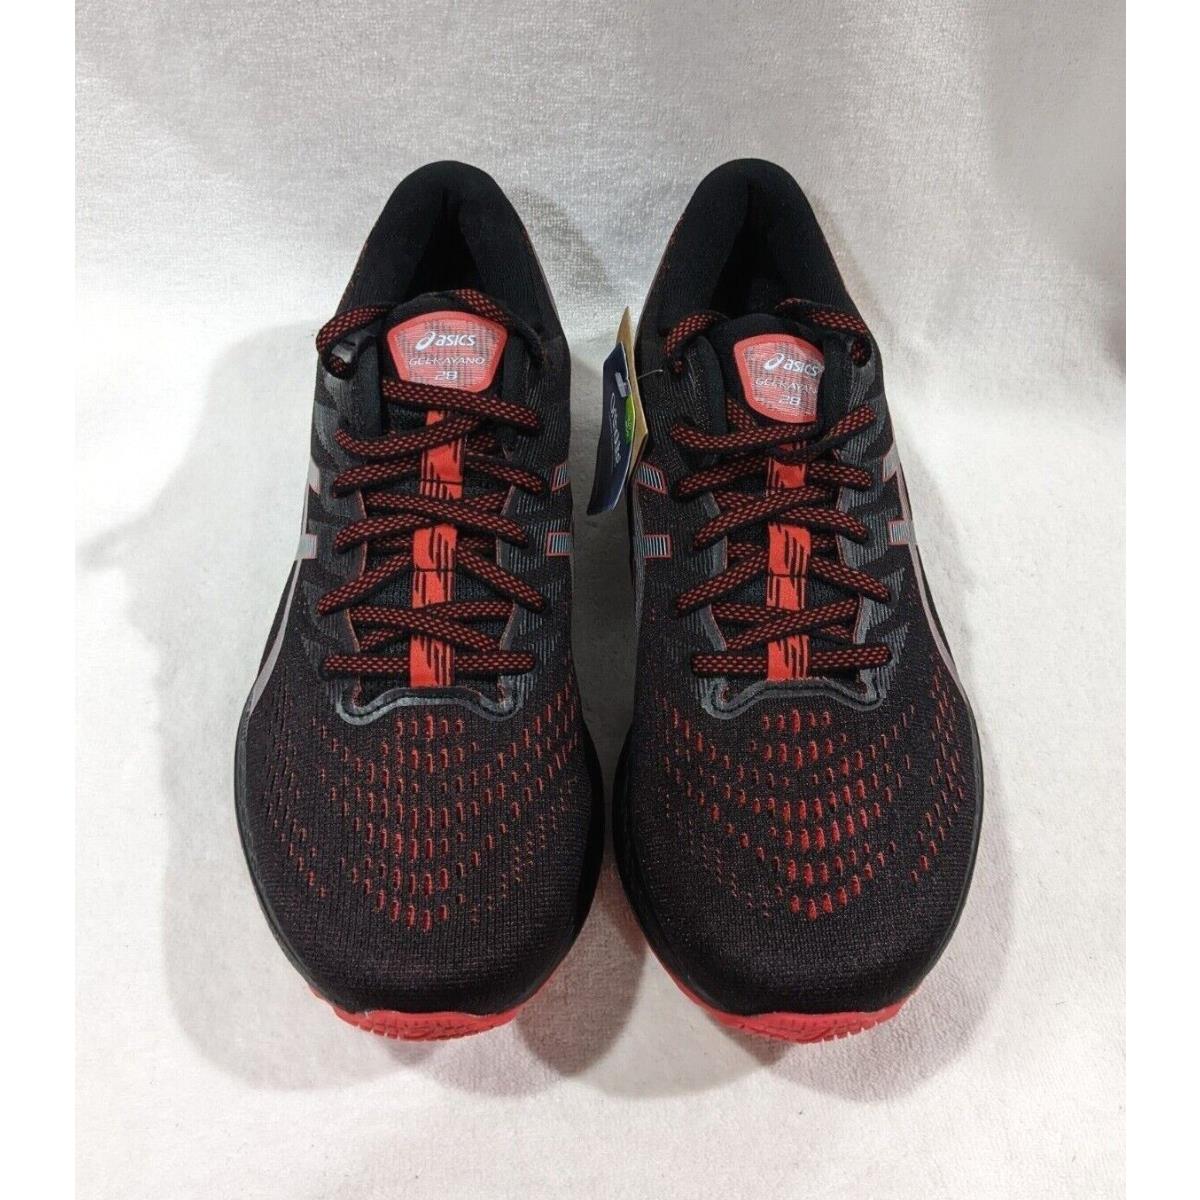 ASICS shoes  - Black , Red 2